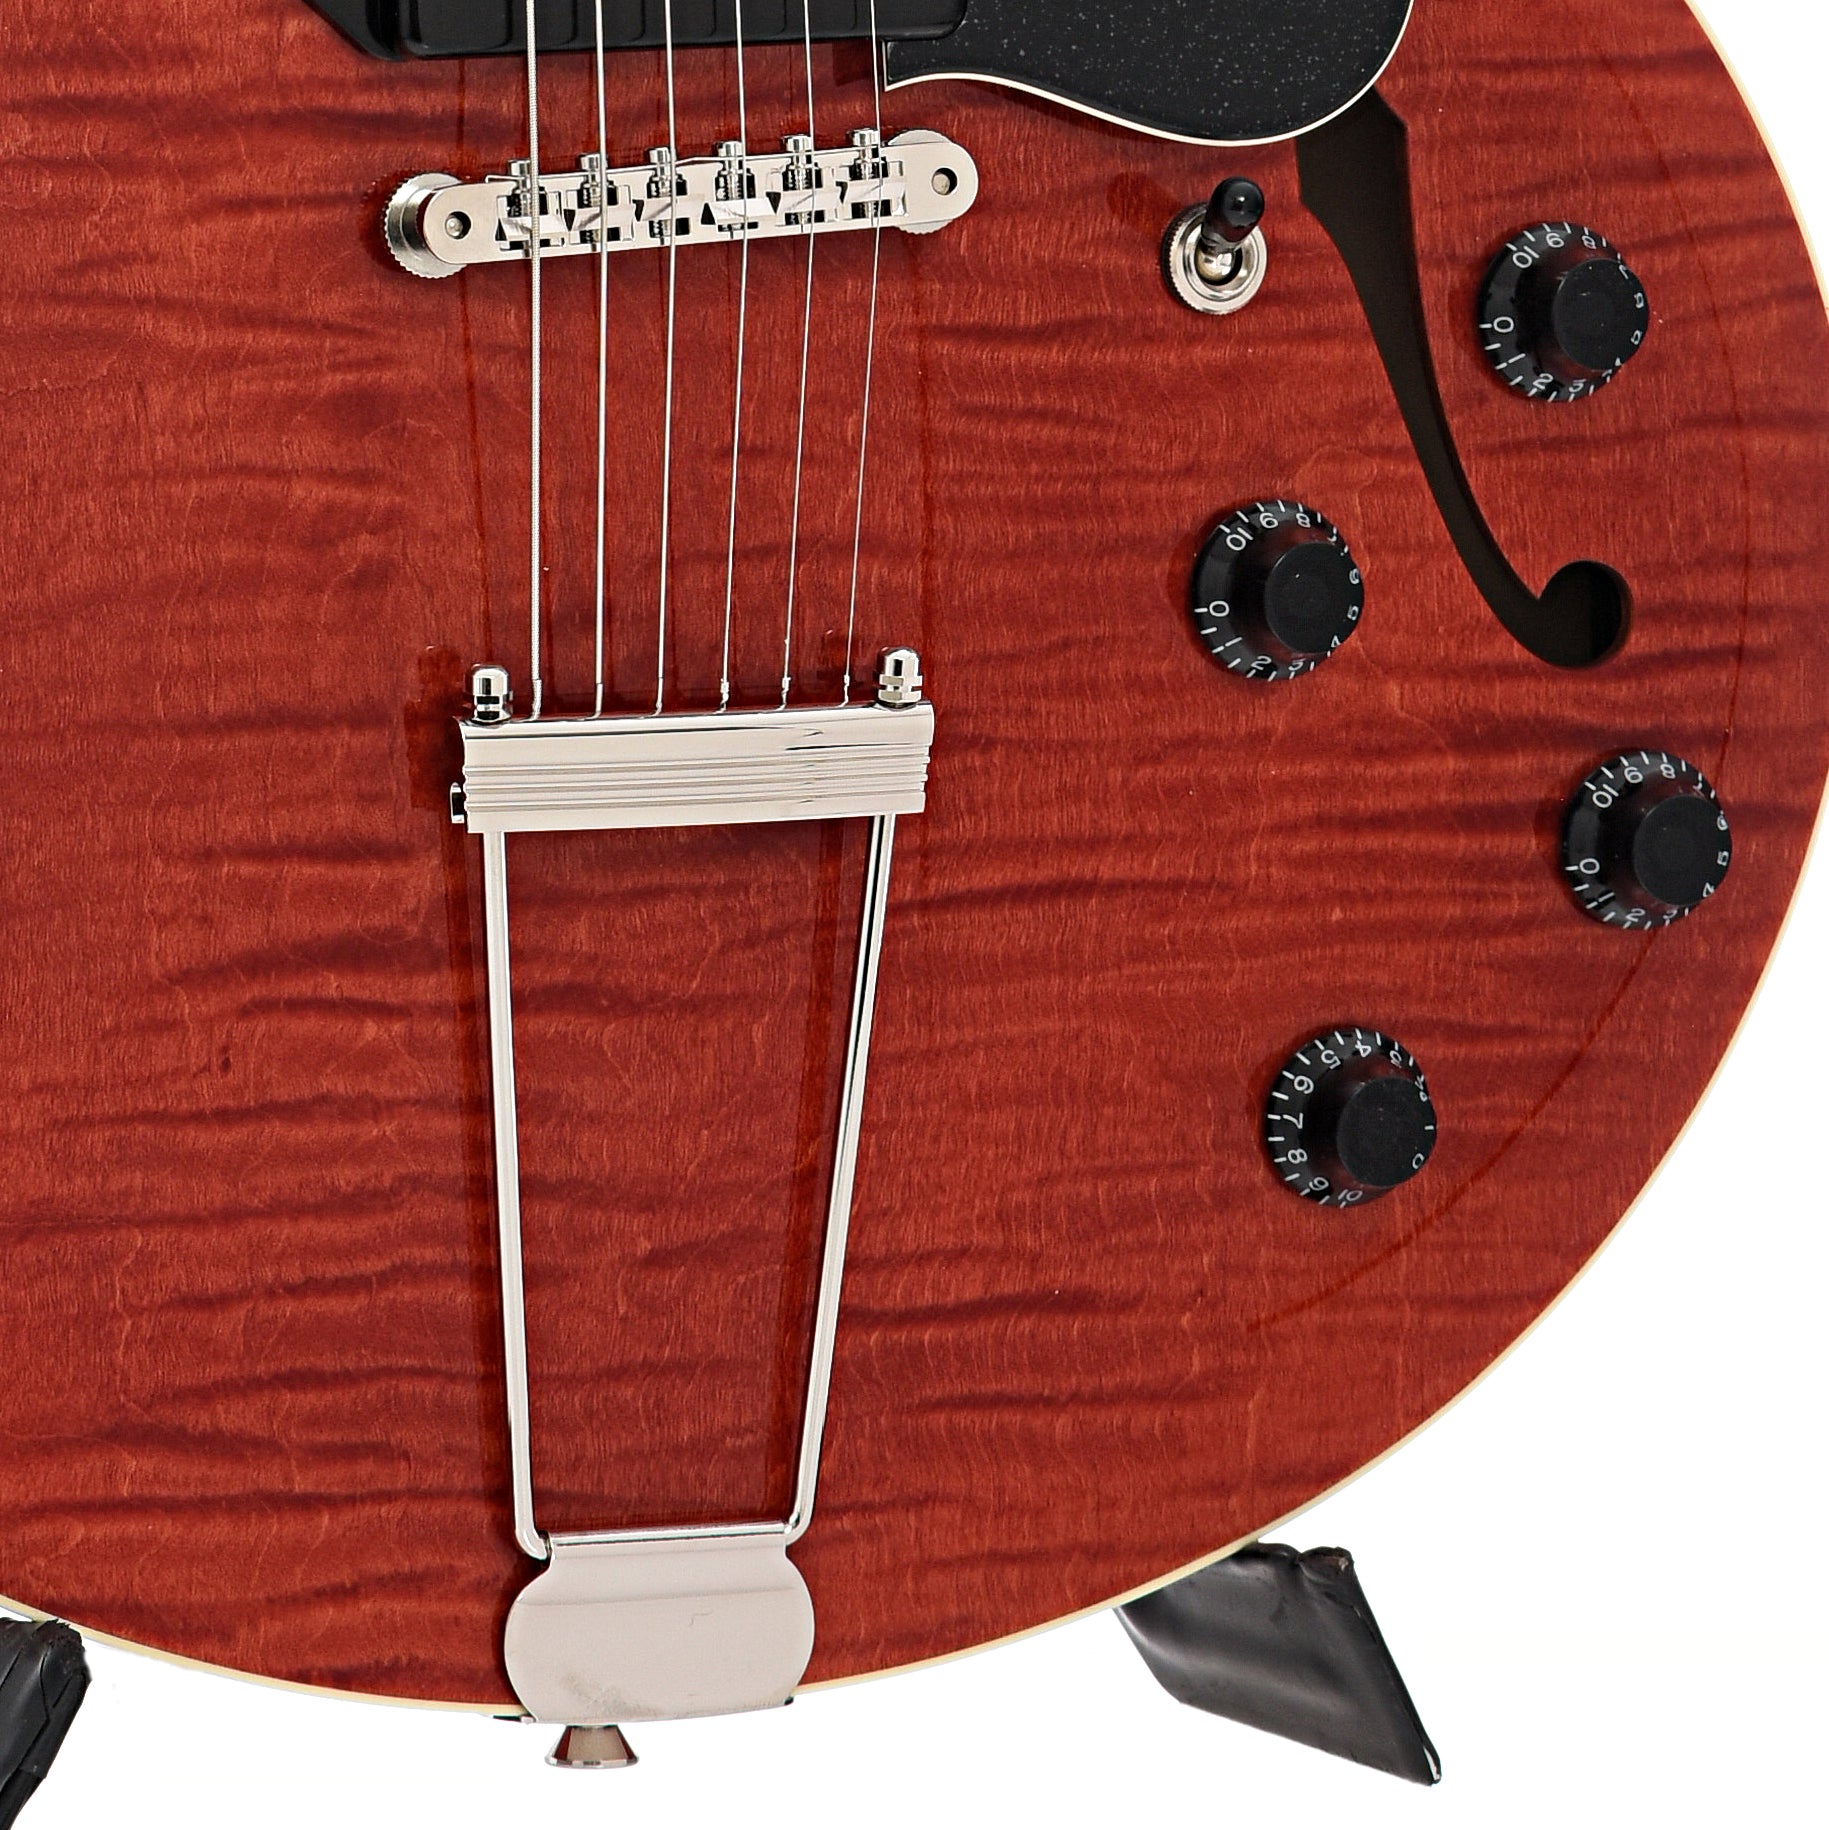 Tailpiece, bridge  and controls of Collings I-30 LC Full Hollow Electric Guitar Faded Cherry